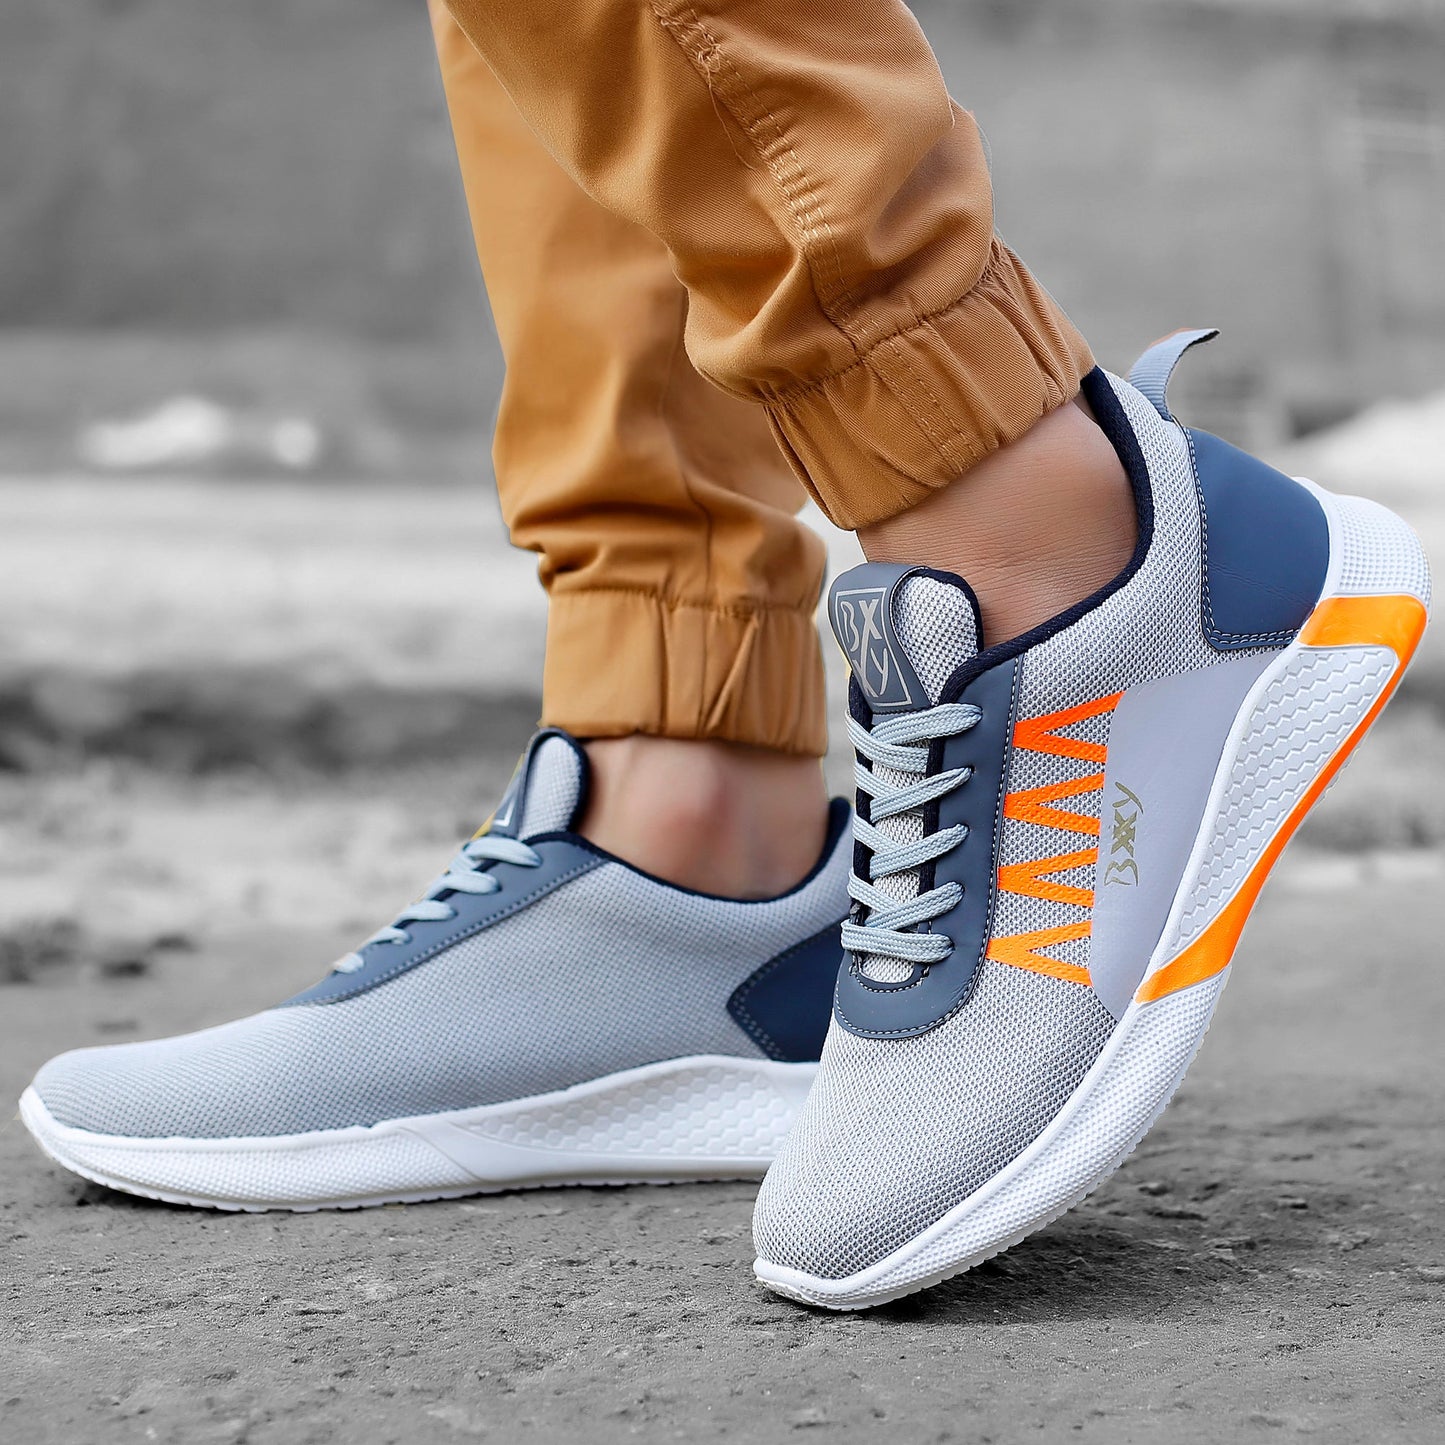 Men's Fashionable Everyday wear Comfortable Sports Shoes